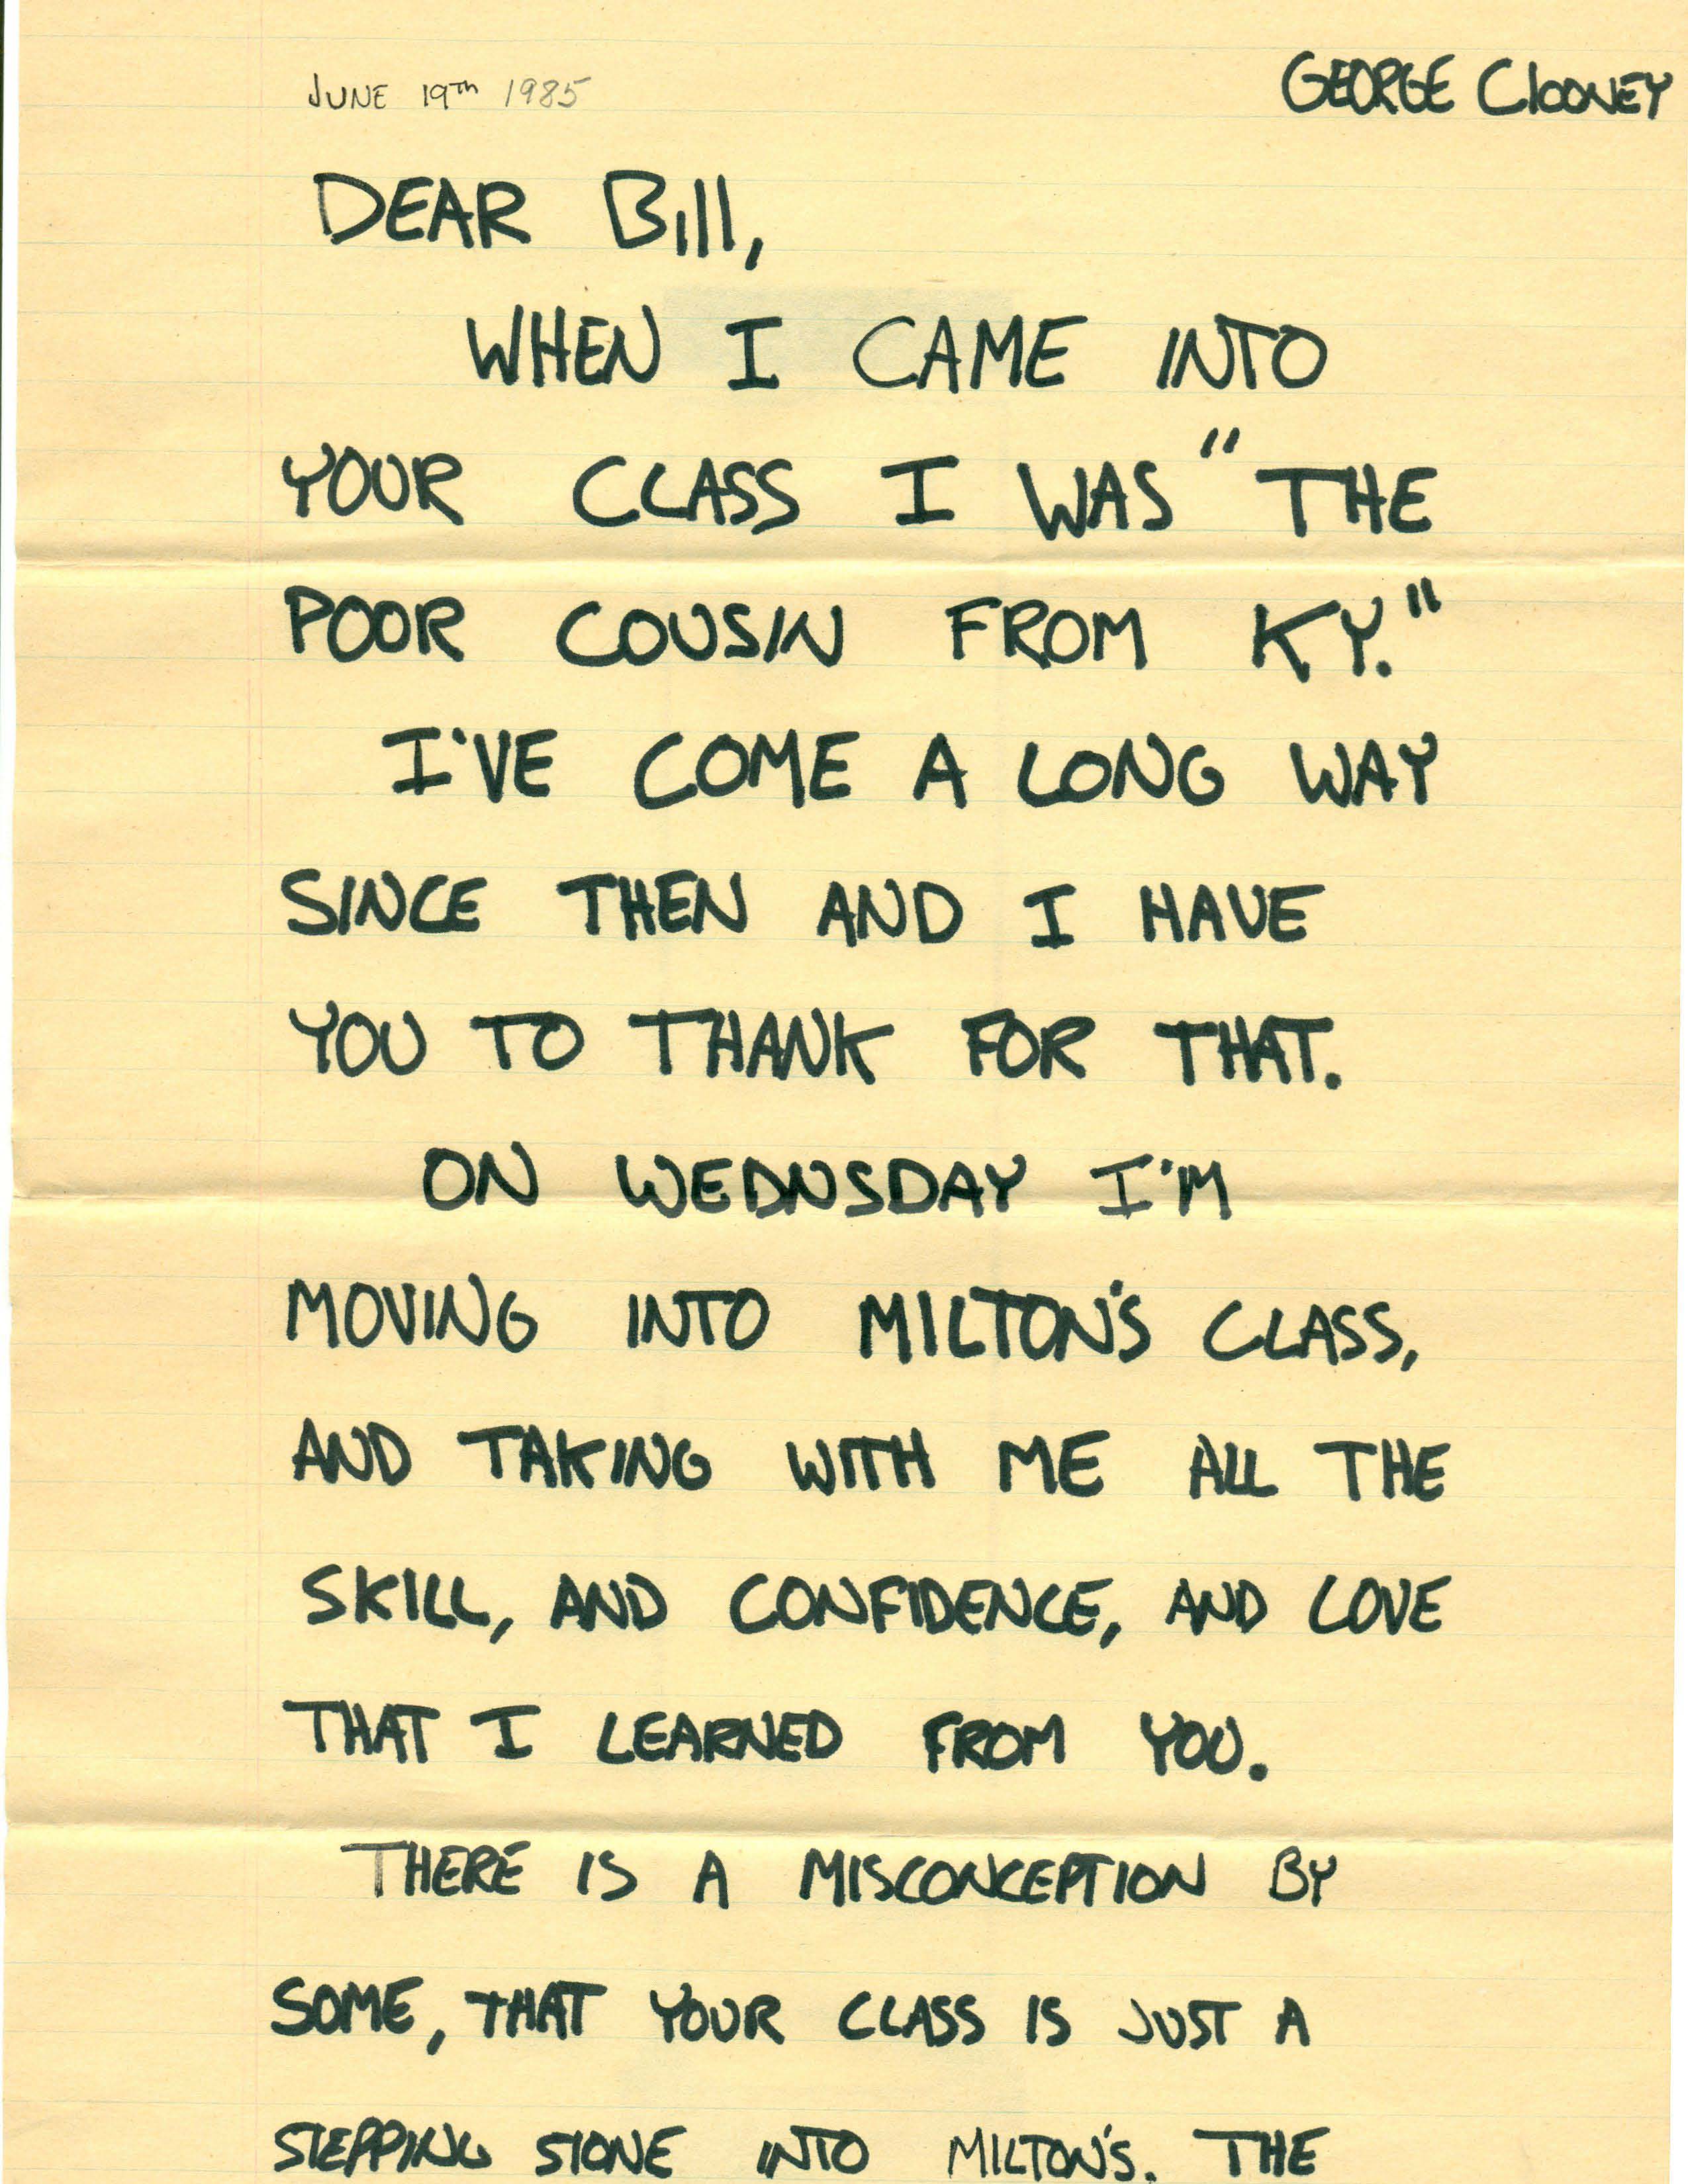 George Clooney letter to Bill June 1985_Page_1